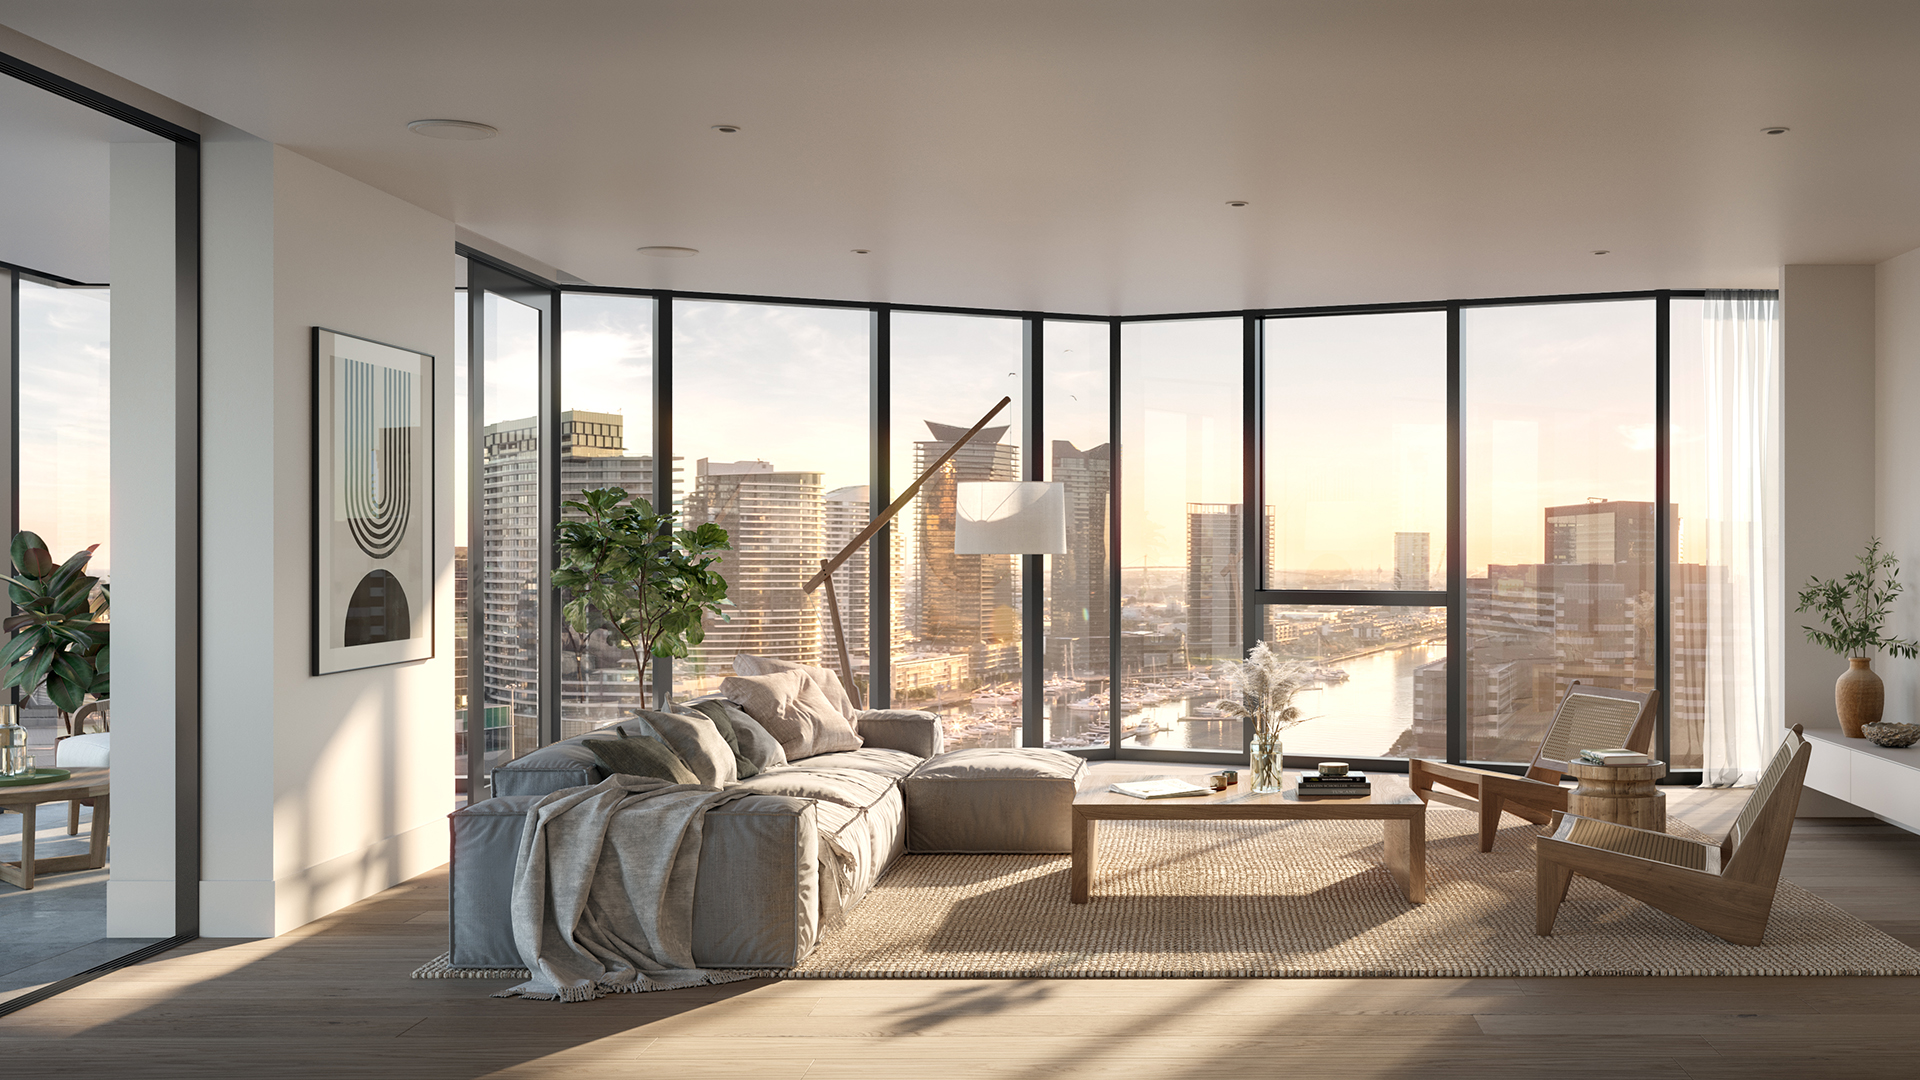 Seafarers living room with view of Melbourne Docklands